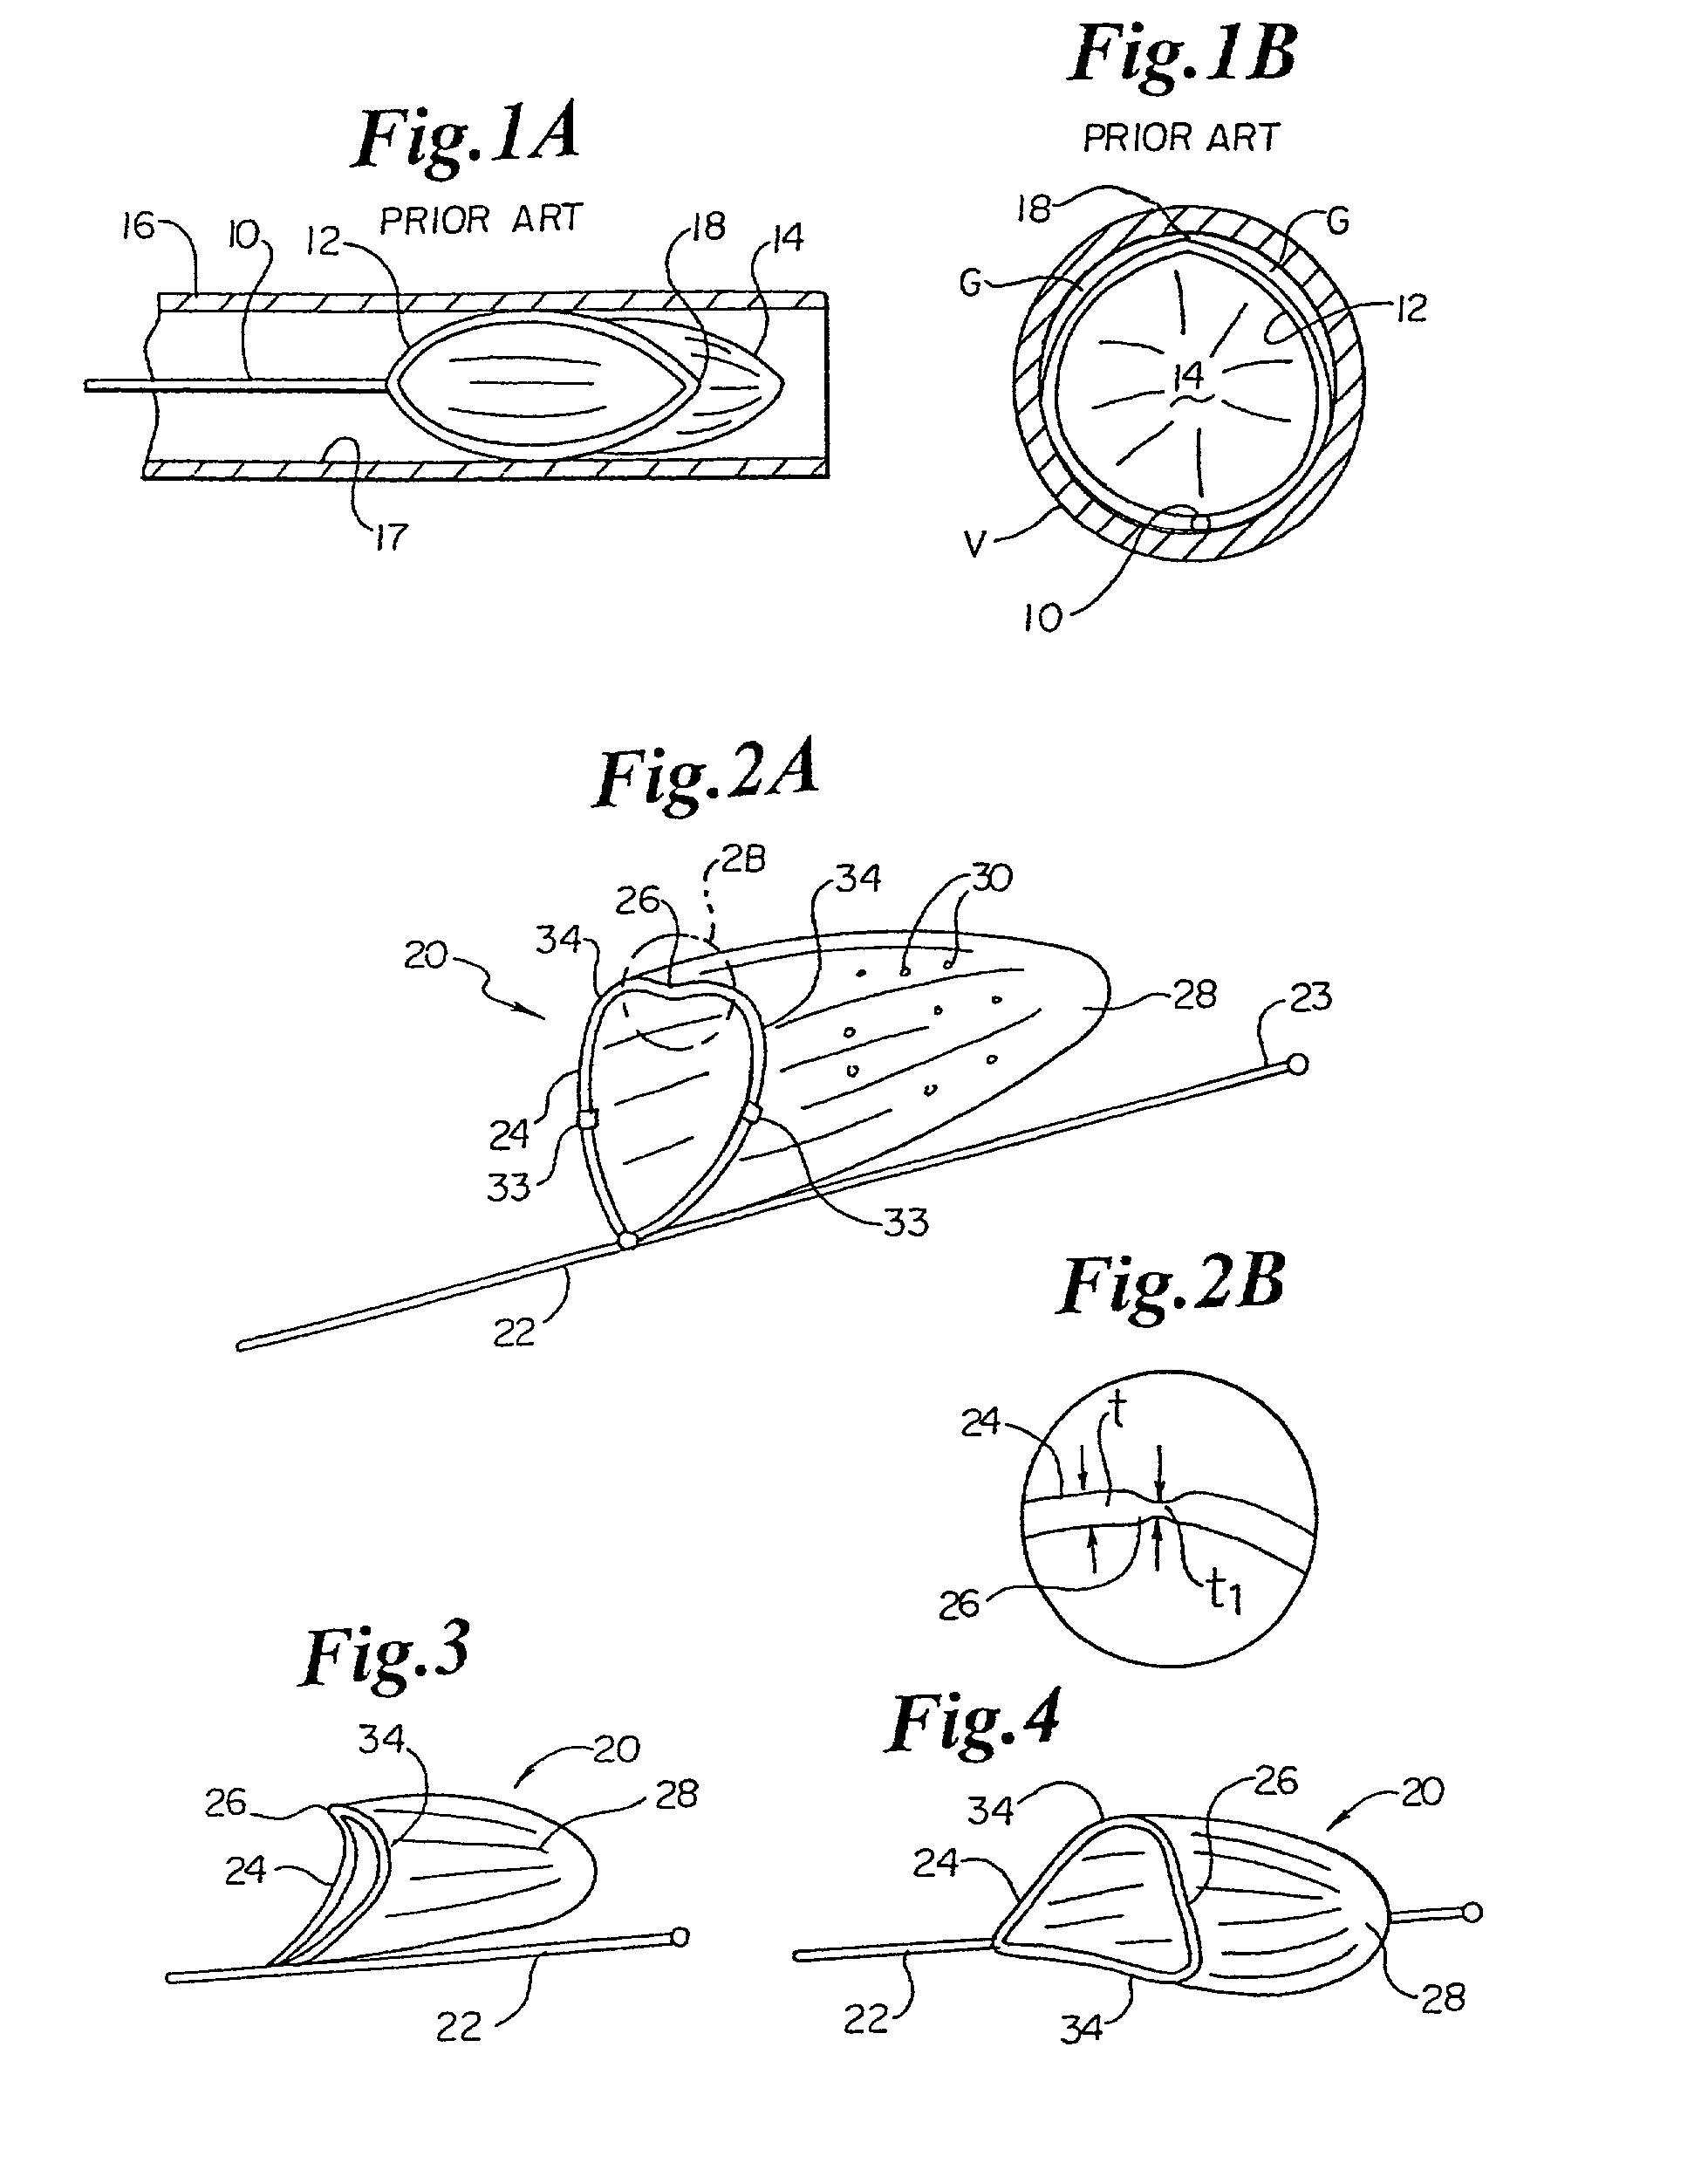 Vascular device for emboli and thrombi removal and methods of use